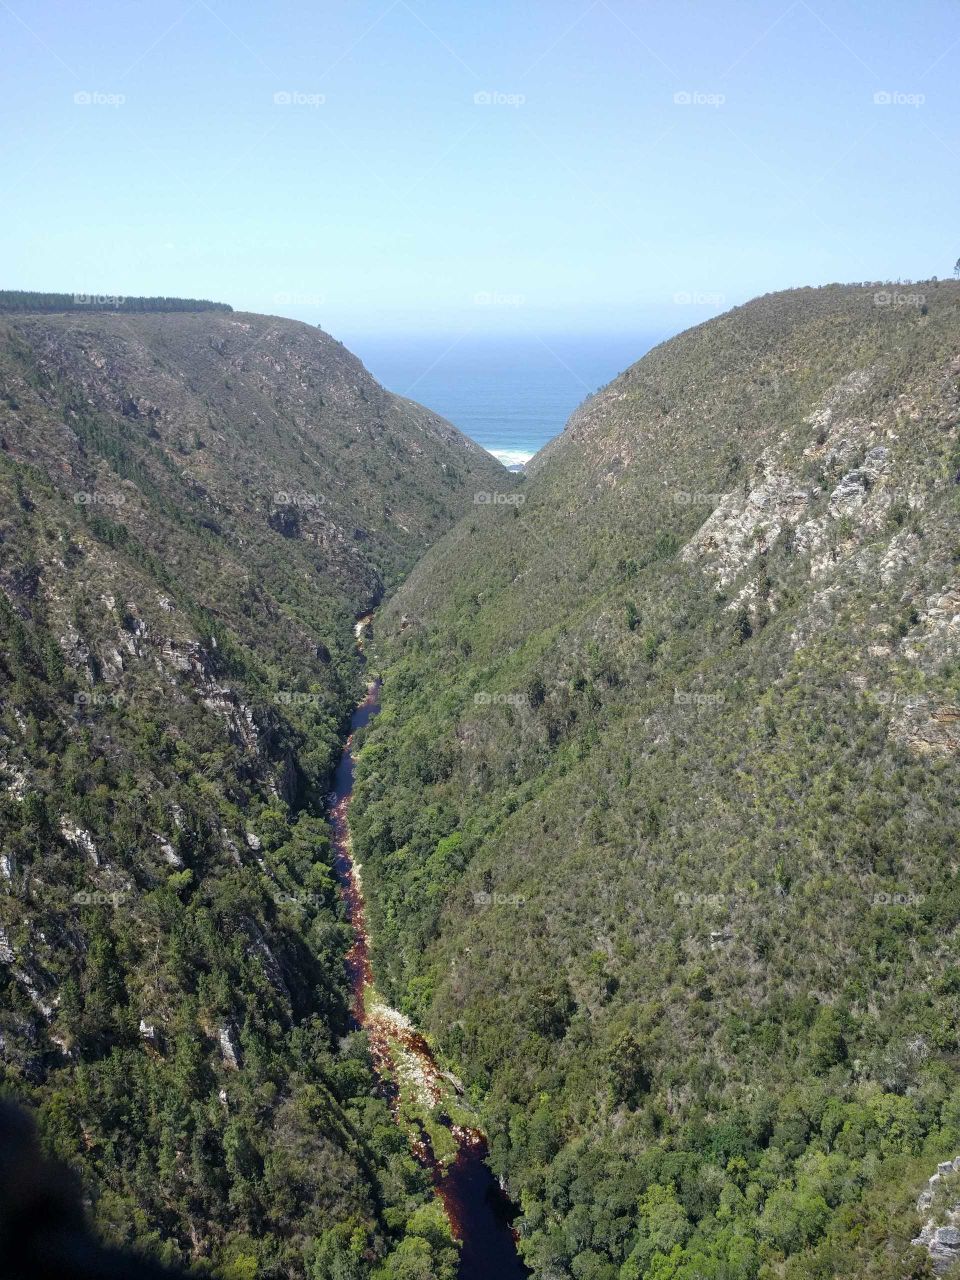 View from Bloukrans Bridge South Africa